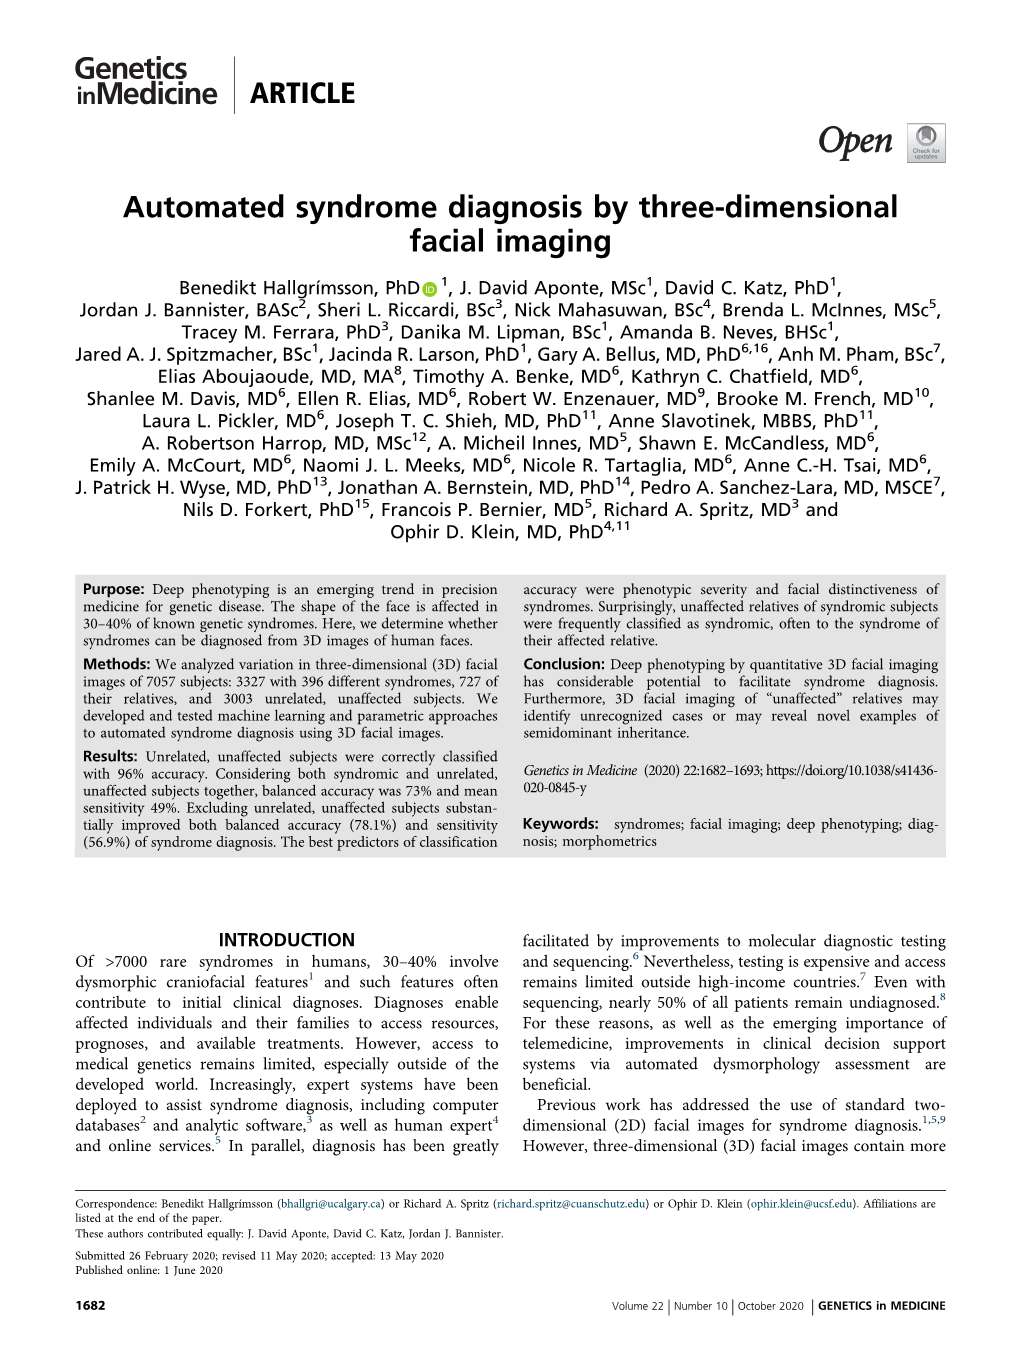 Automated Syndrome Diagnosis by Three-Dimensional Facial Imaging